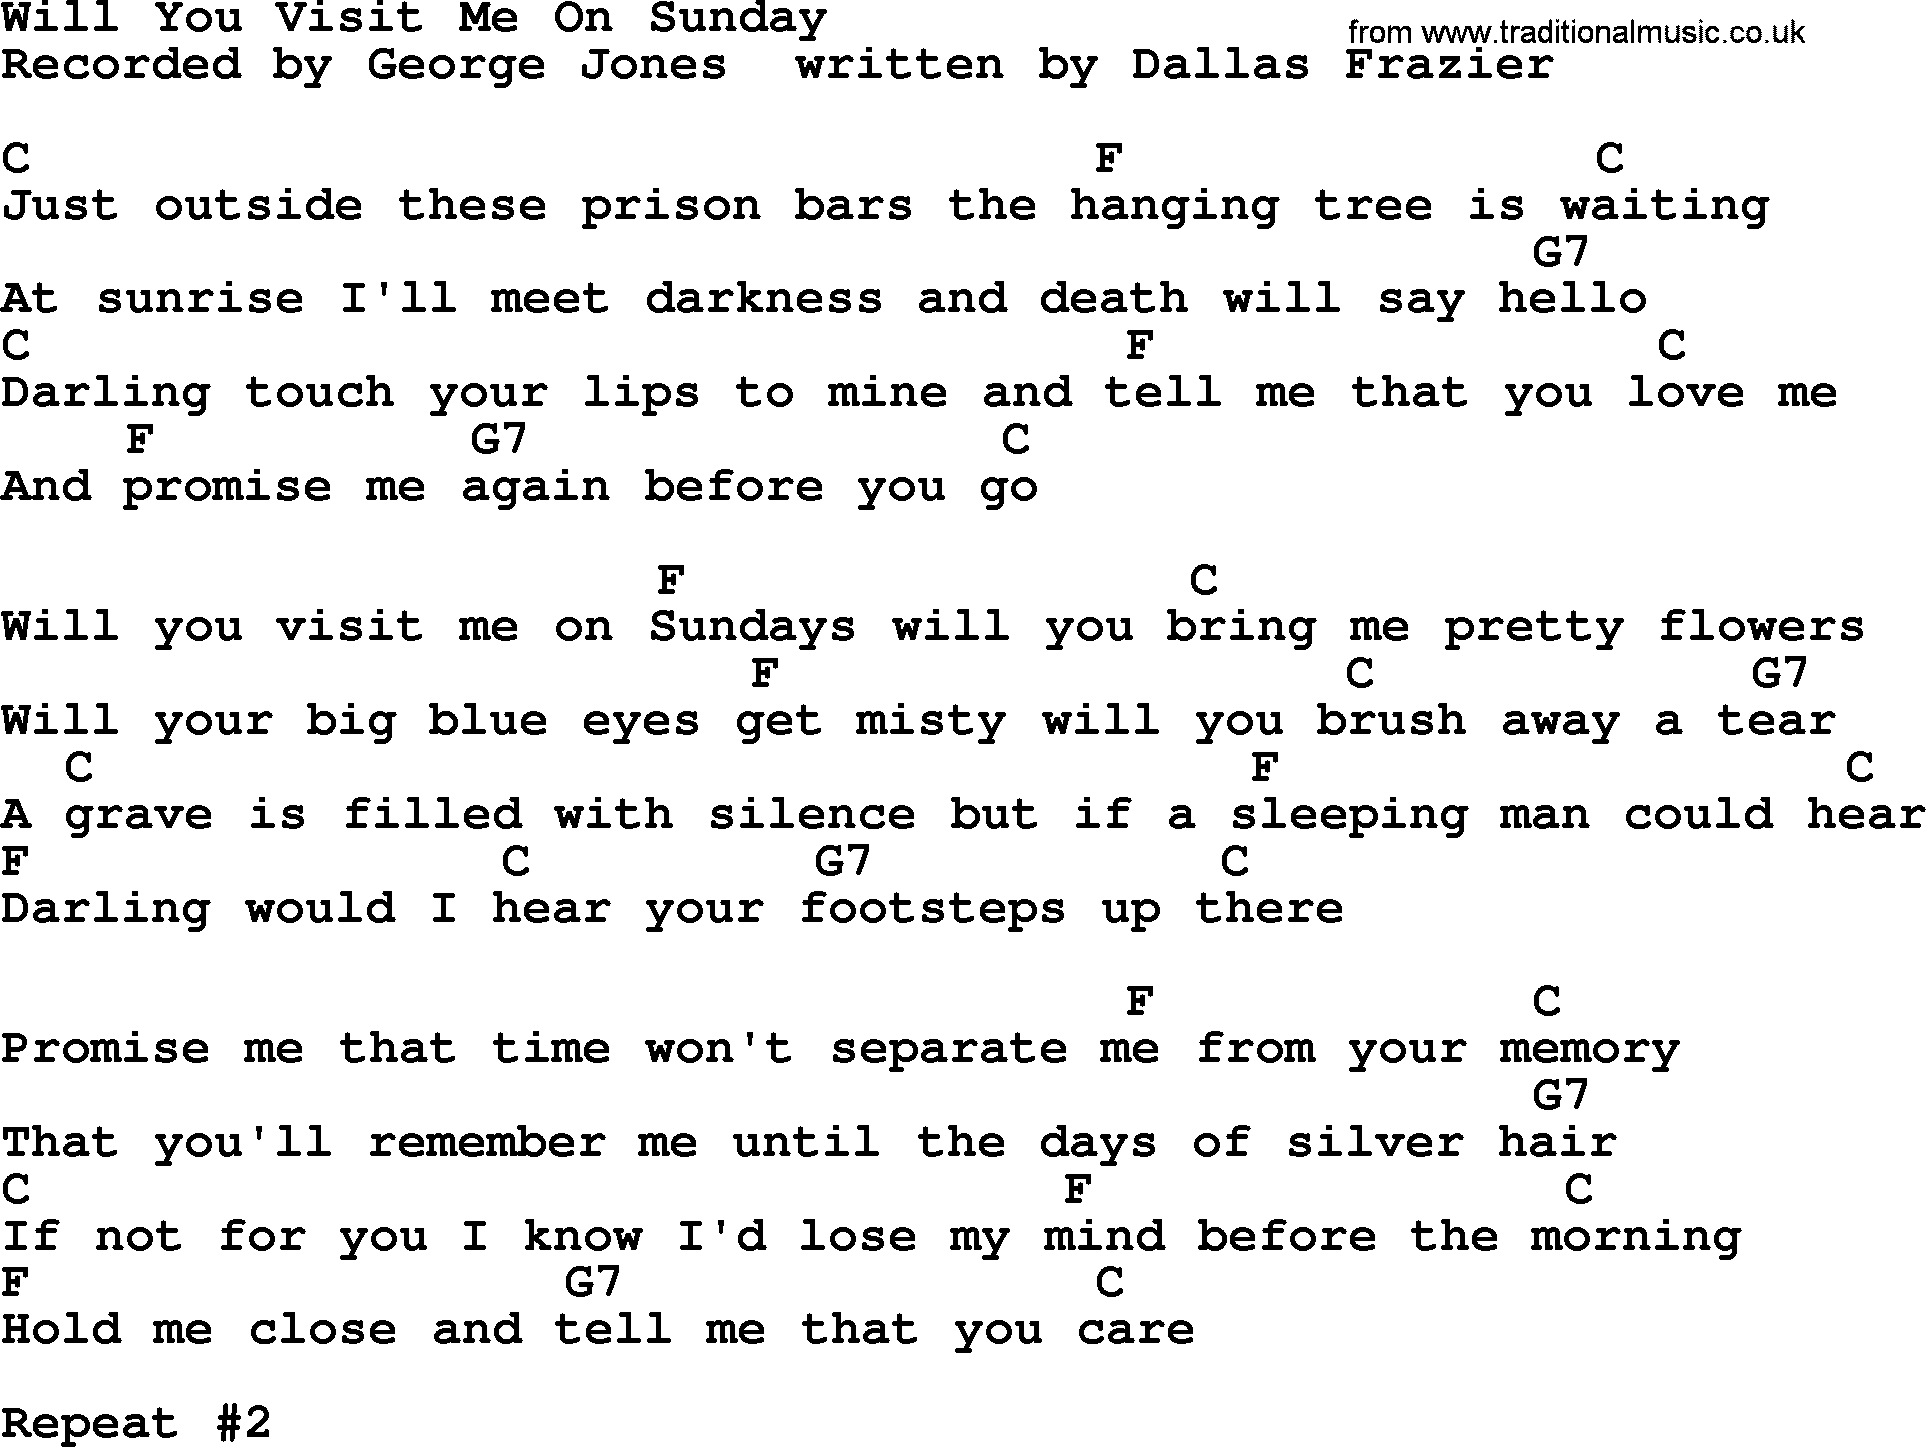 George Jones song: Will You Visit Me On Sunday, lyrics and chords